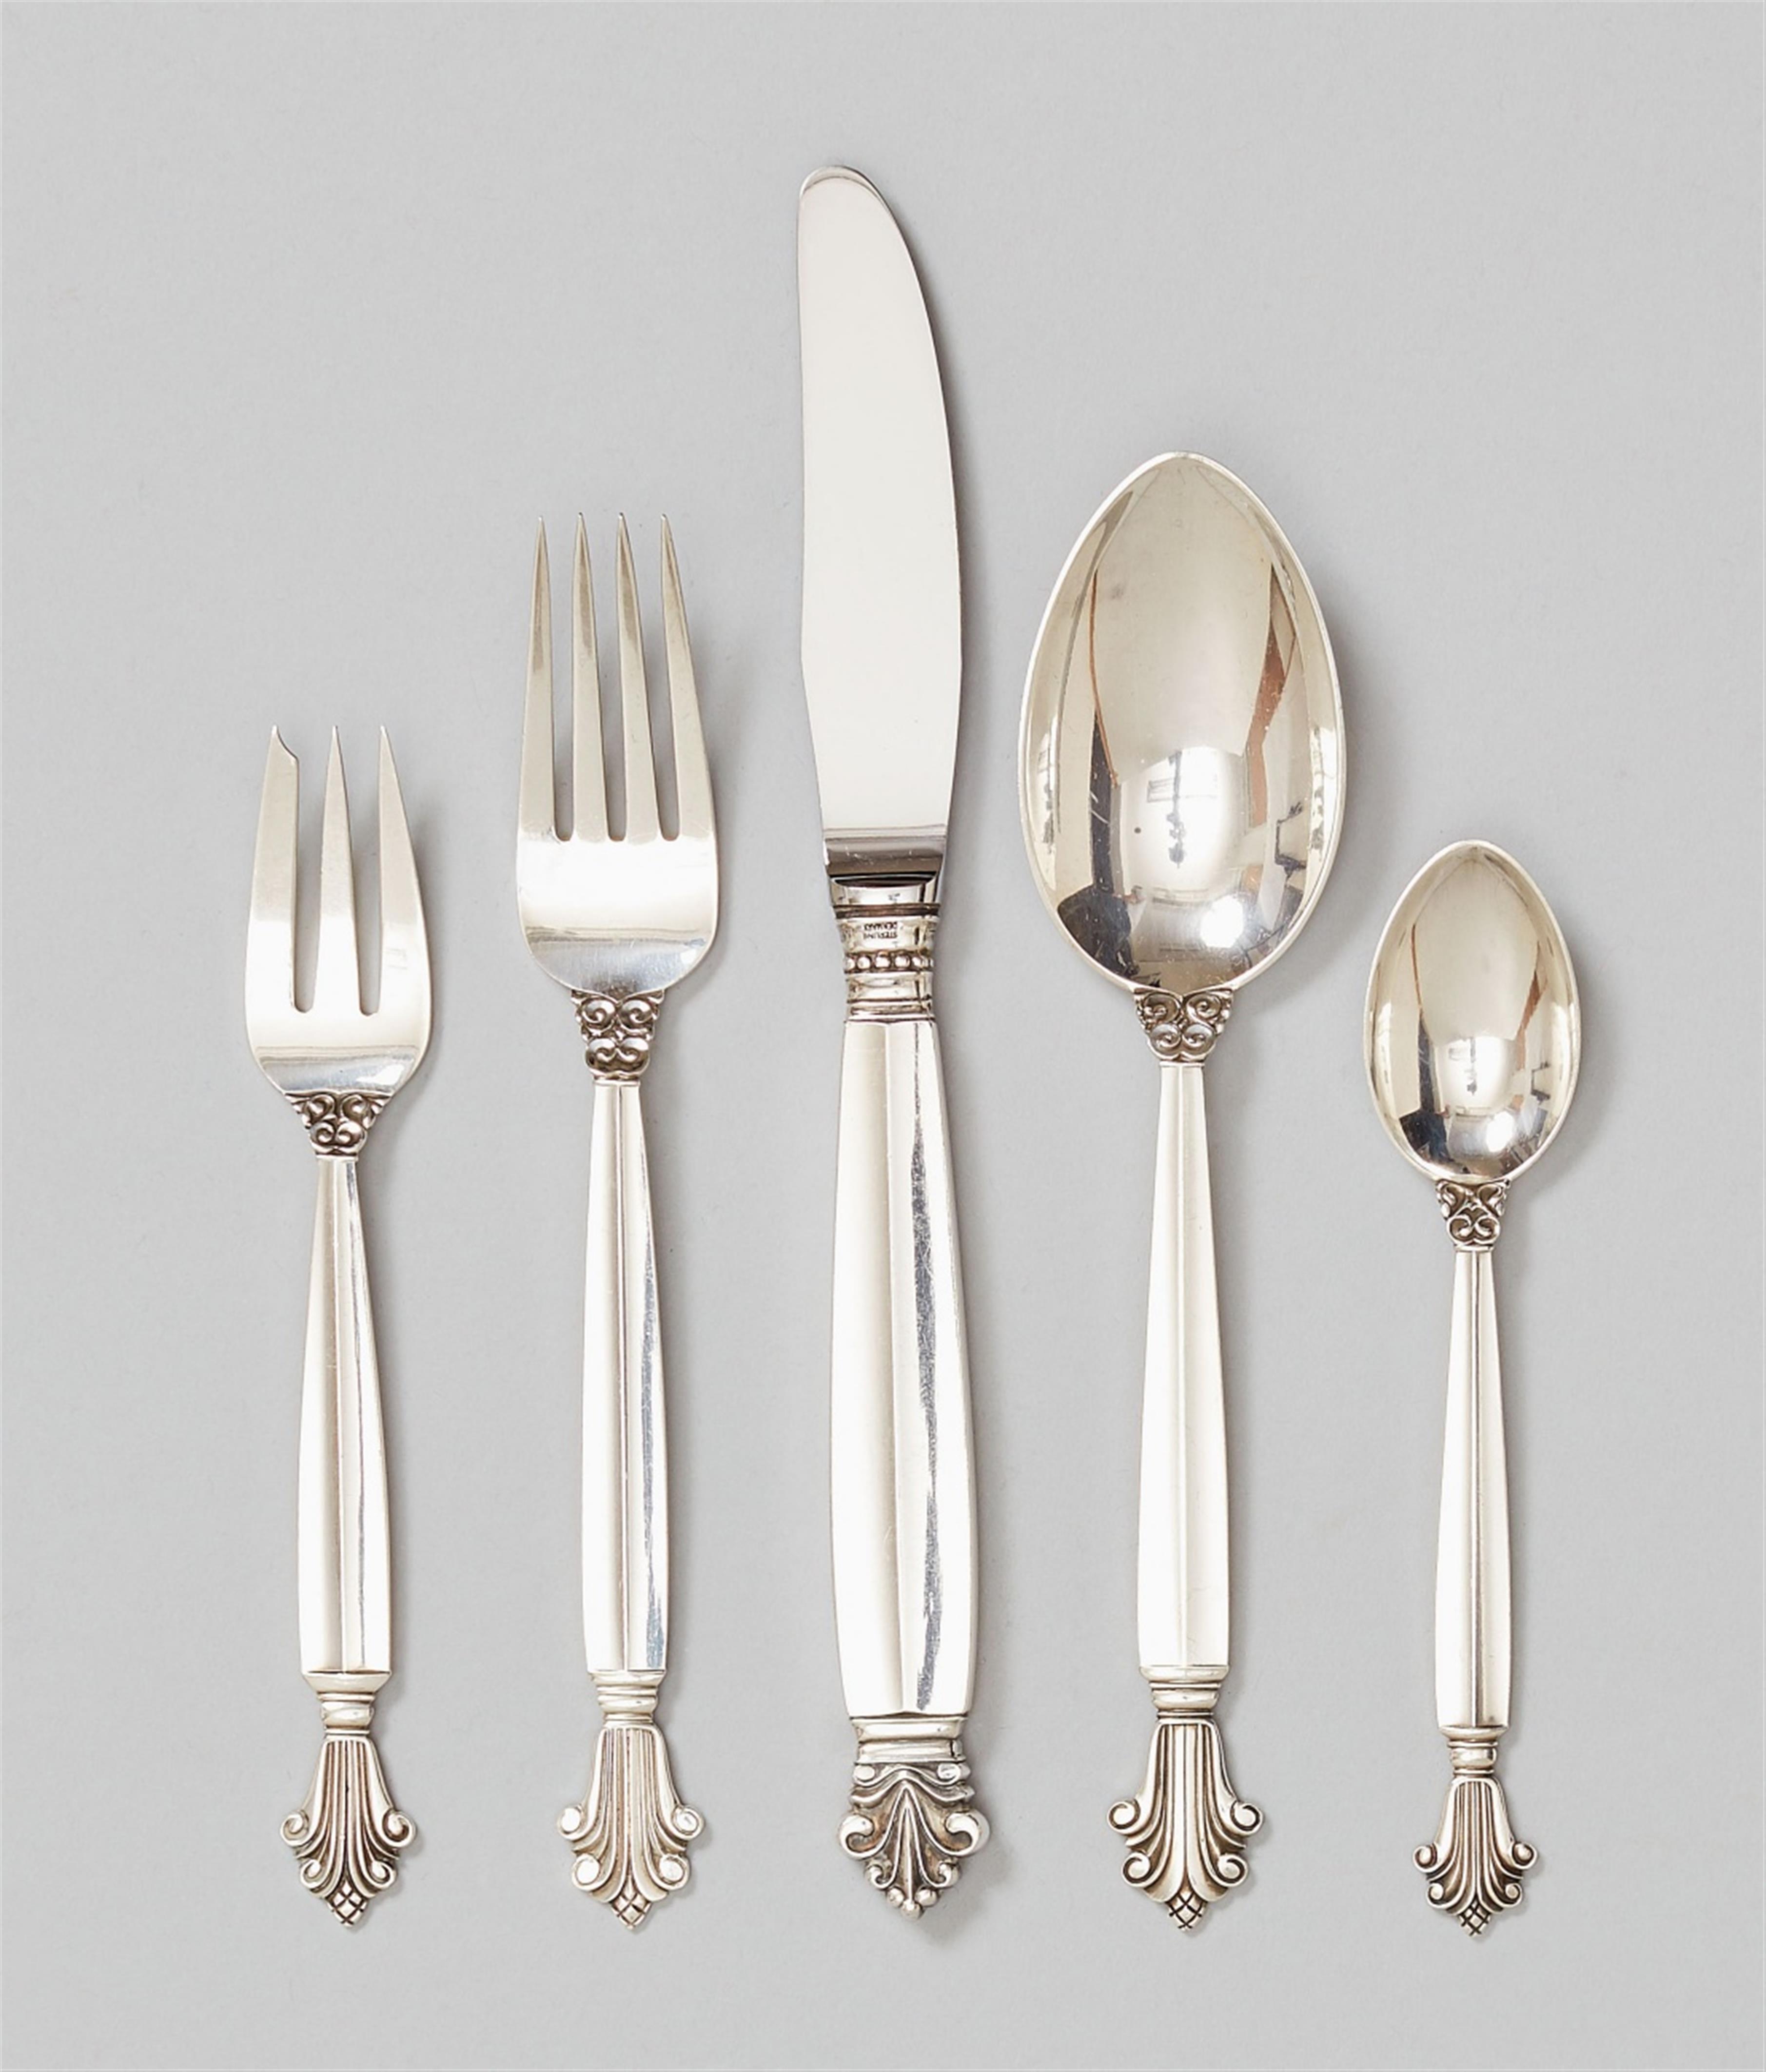 A Copenhagen silver cutlery set, no. 180. Acanthus/Königin model. 30 pieces comprising six knives, forks, spoons, cake forks and tea spoons. Marks of Georg Jensen, designed by Johan Rohde 1917, produced 1945 - 76. - image-1